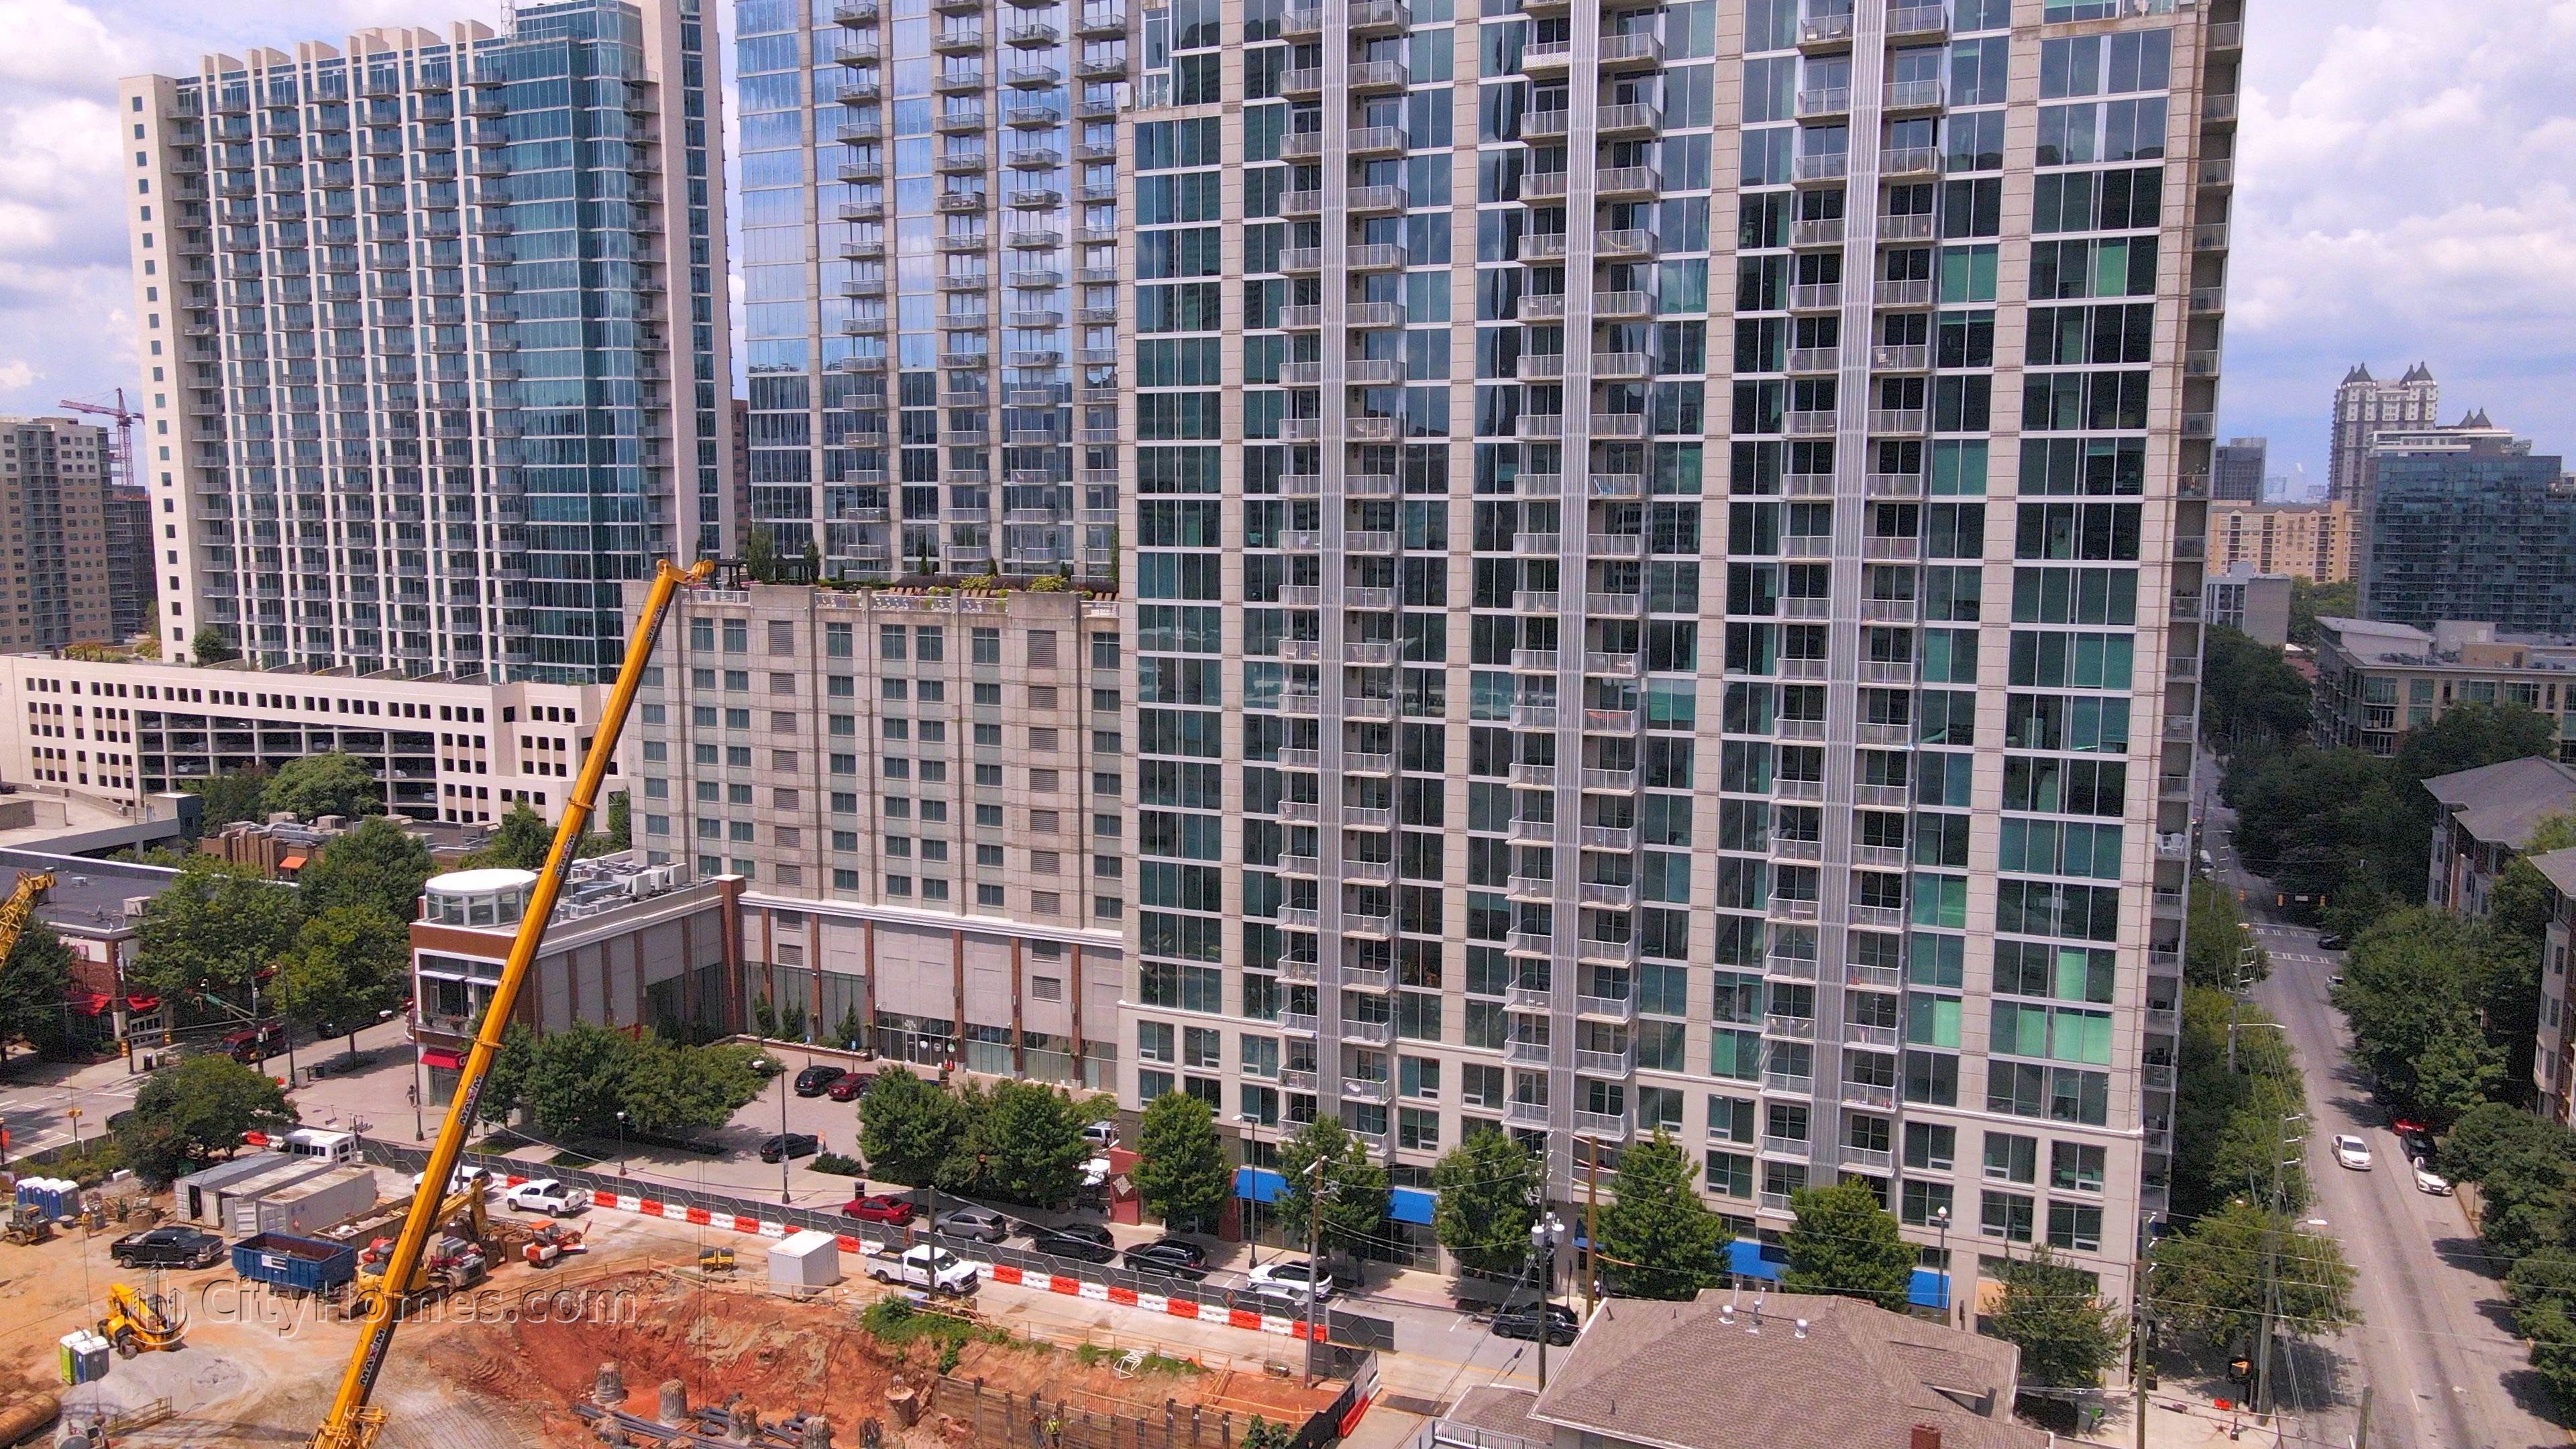 Viewpoint Condominiums xây dựng tại 855 Peachtree St NW, Greater Midtown, Atlanta, GA 30308